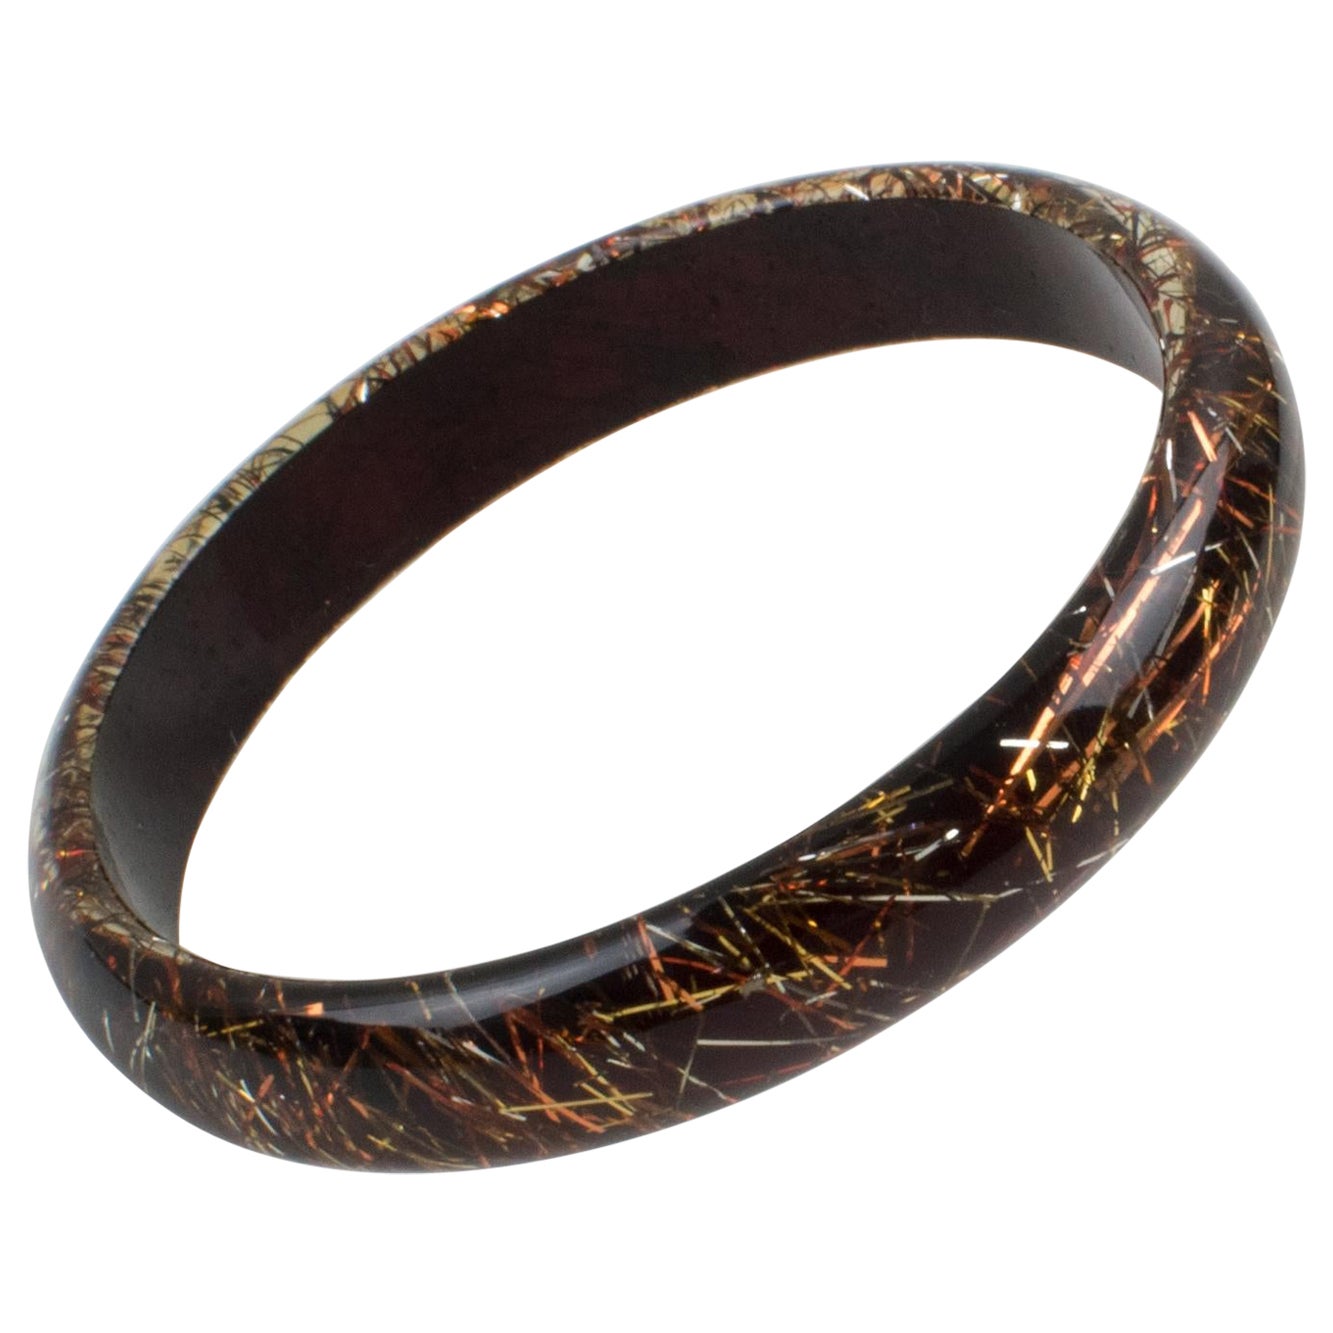 Lucite Bracelet Bangle with Copper Silver Metallic Thread For Sale